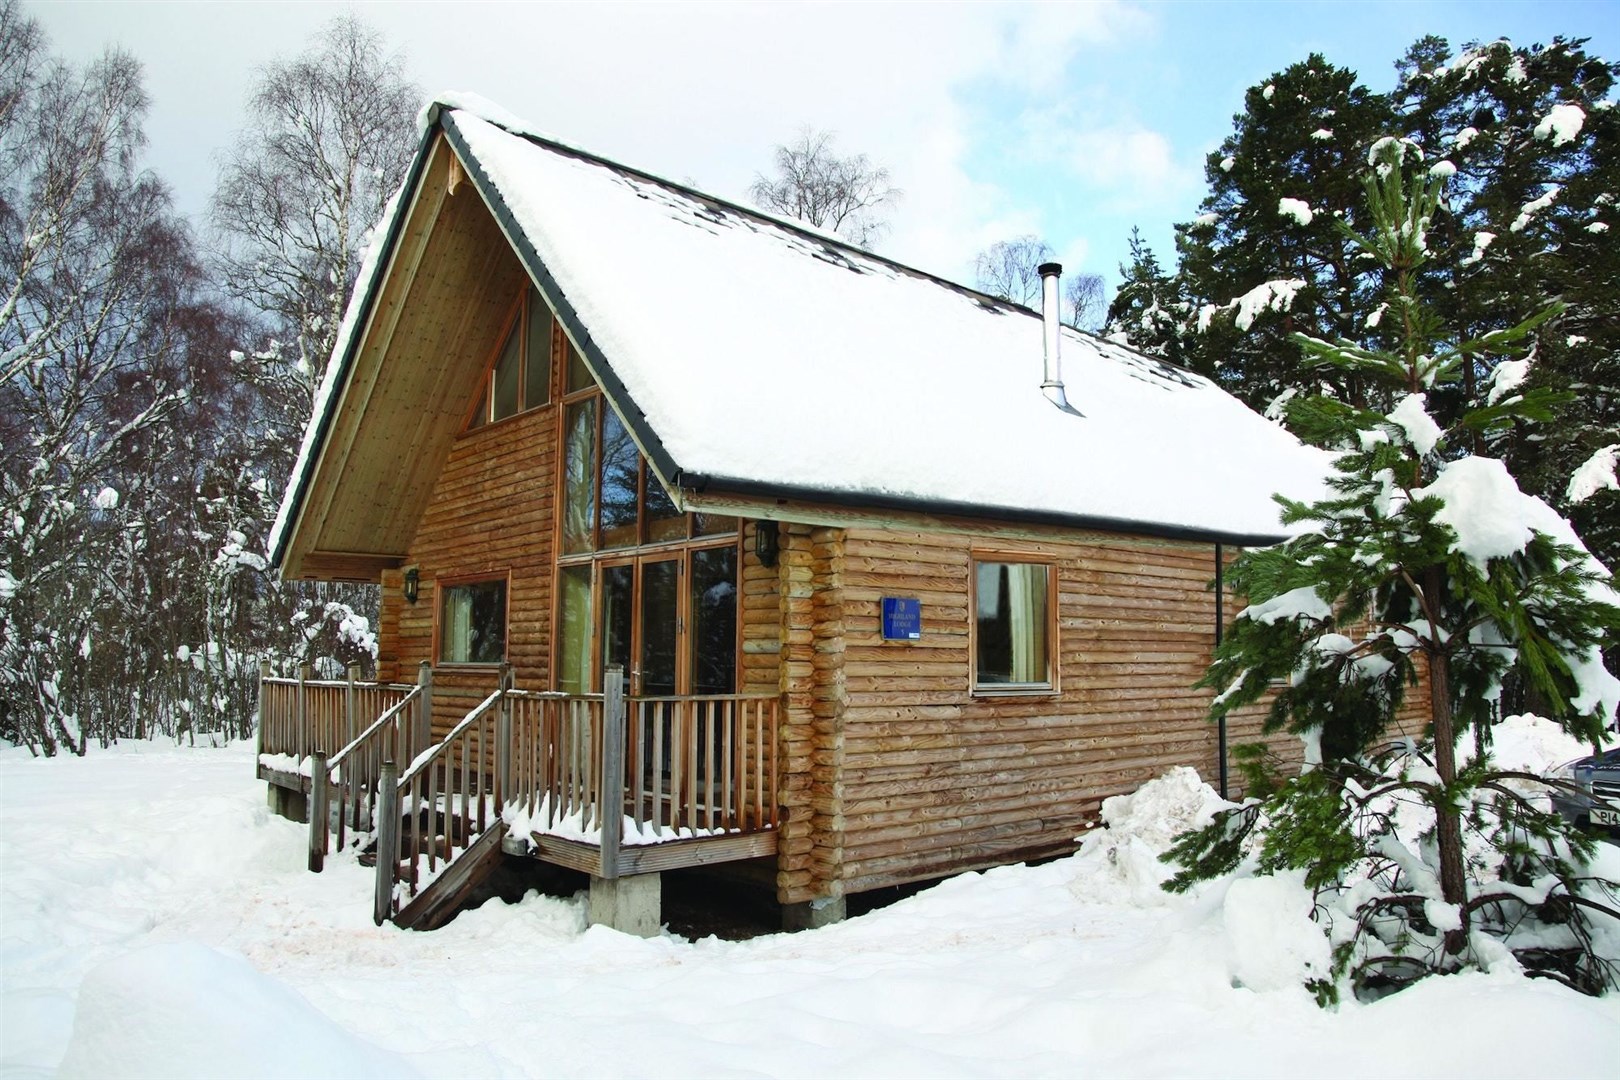 The Resort has lots of lodges available for the perfect winter getaway.